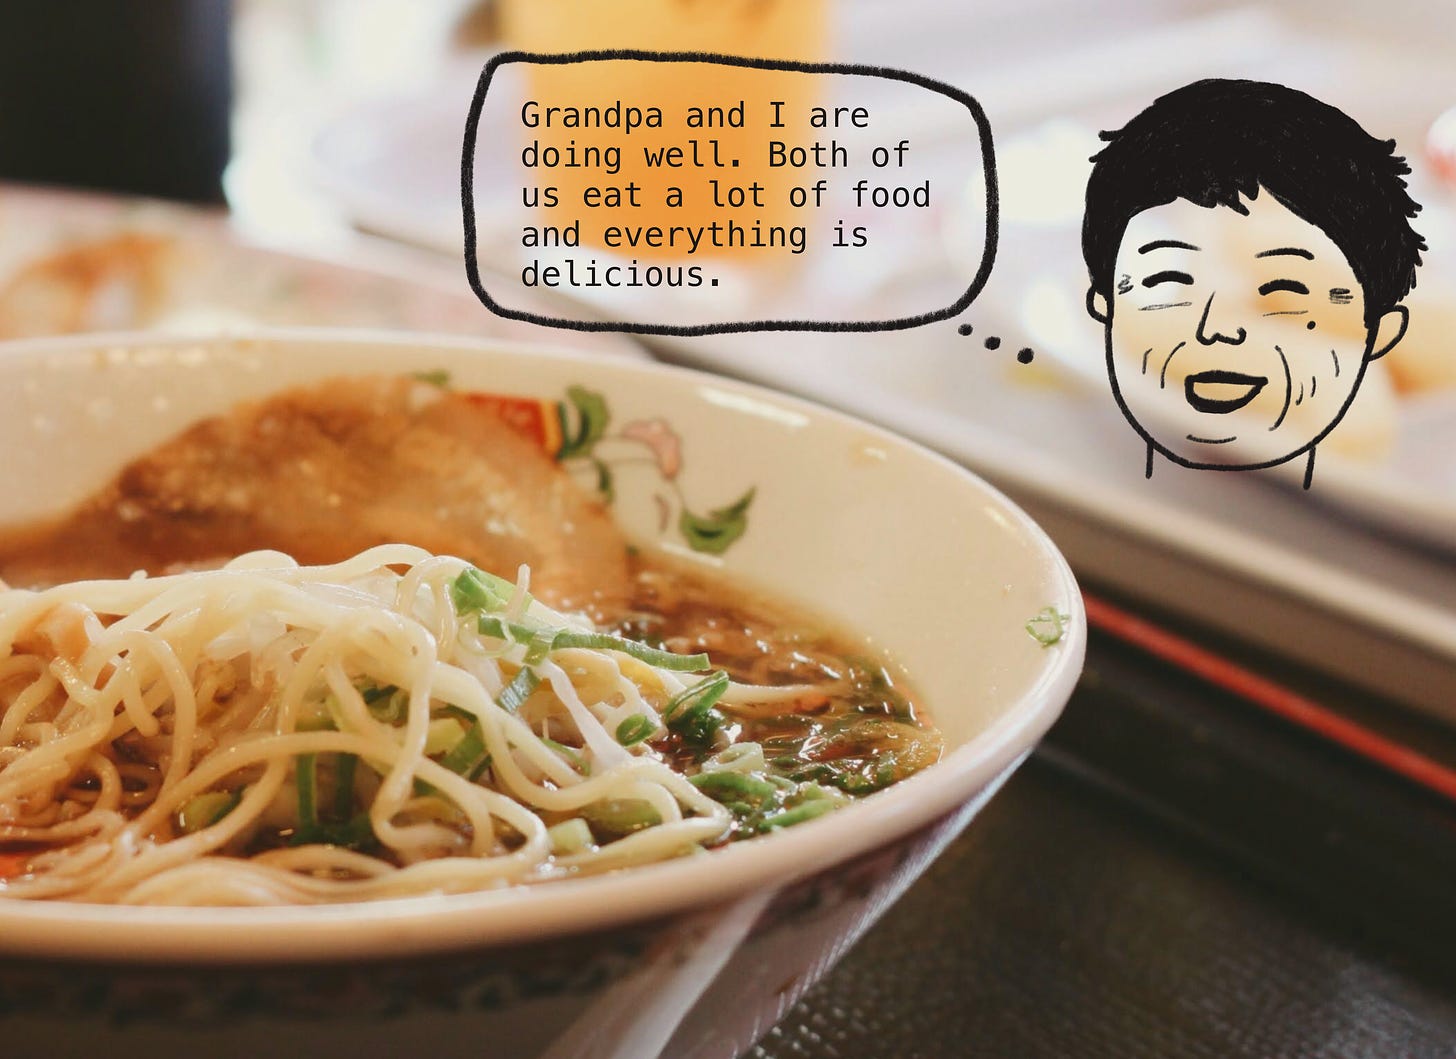 A bowl of ramen with an illustrated sketch of a Japanese grandma. A speech bubble says, "Grandpa and I are doing well. Both of us eat a lot of food and everything is delicious."